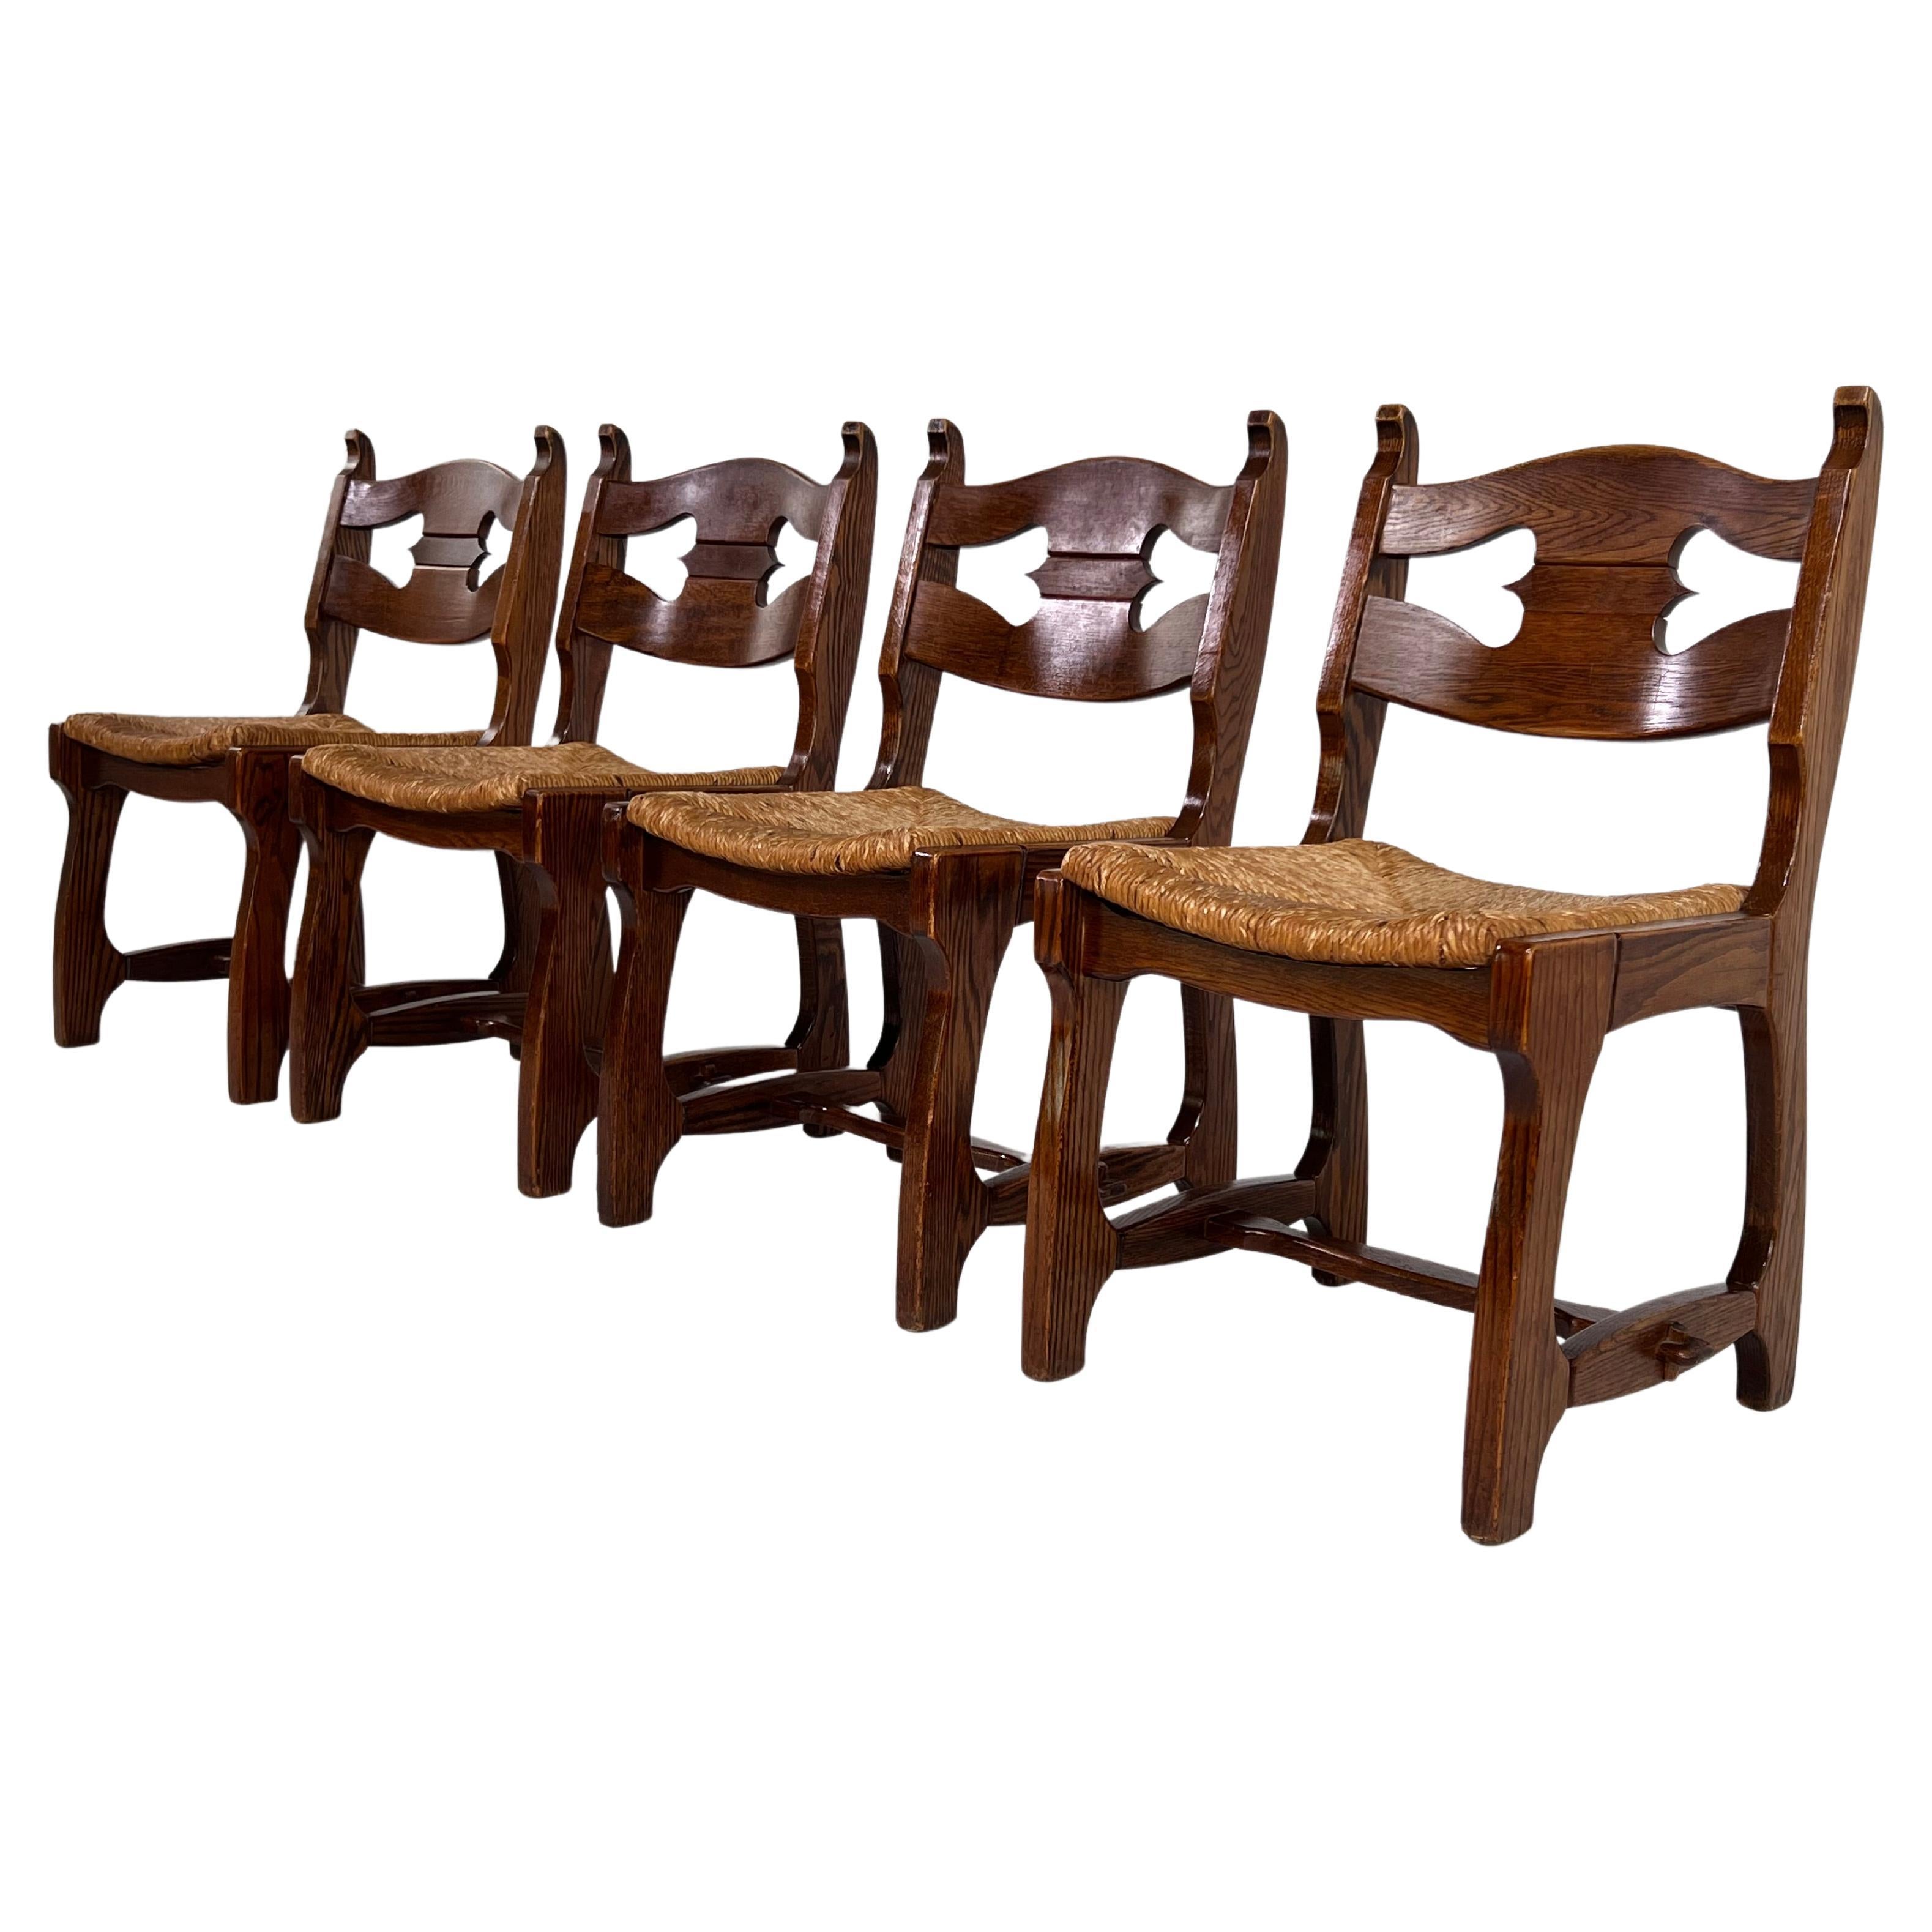 1950s Design Oak Wooden and Braided Straw Seats Set of 4 Chairs For Sale